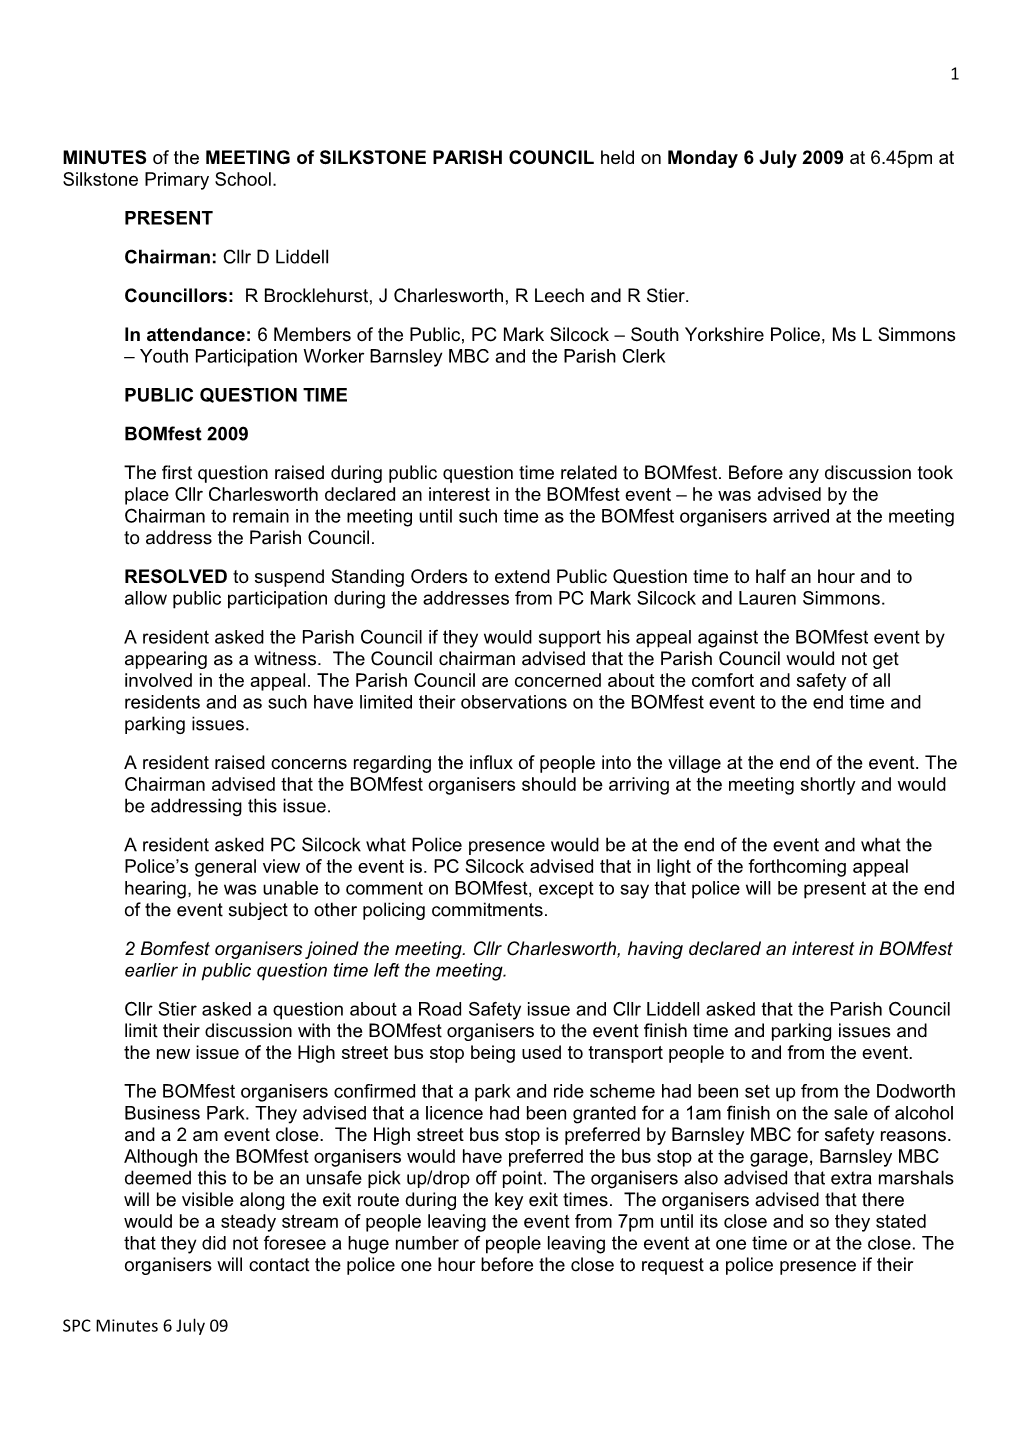 MINUTES of Themeeting of SILKSTONE PARISH COUNCIL Held on Monday 6 July 2009 at 6.45Pm